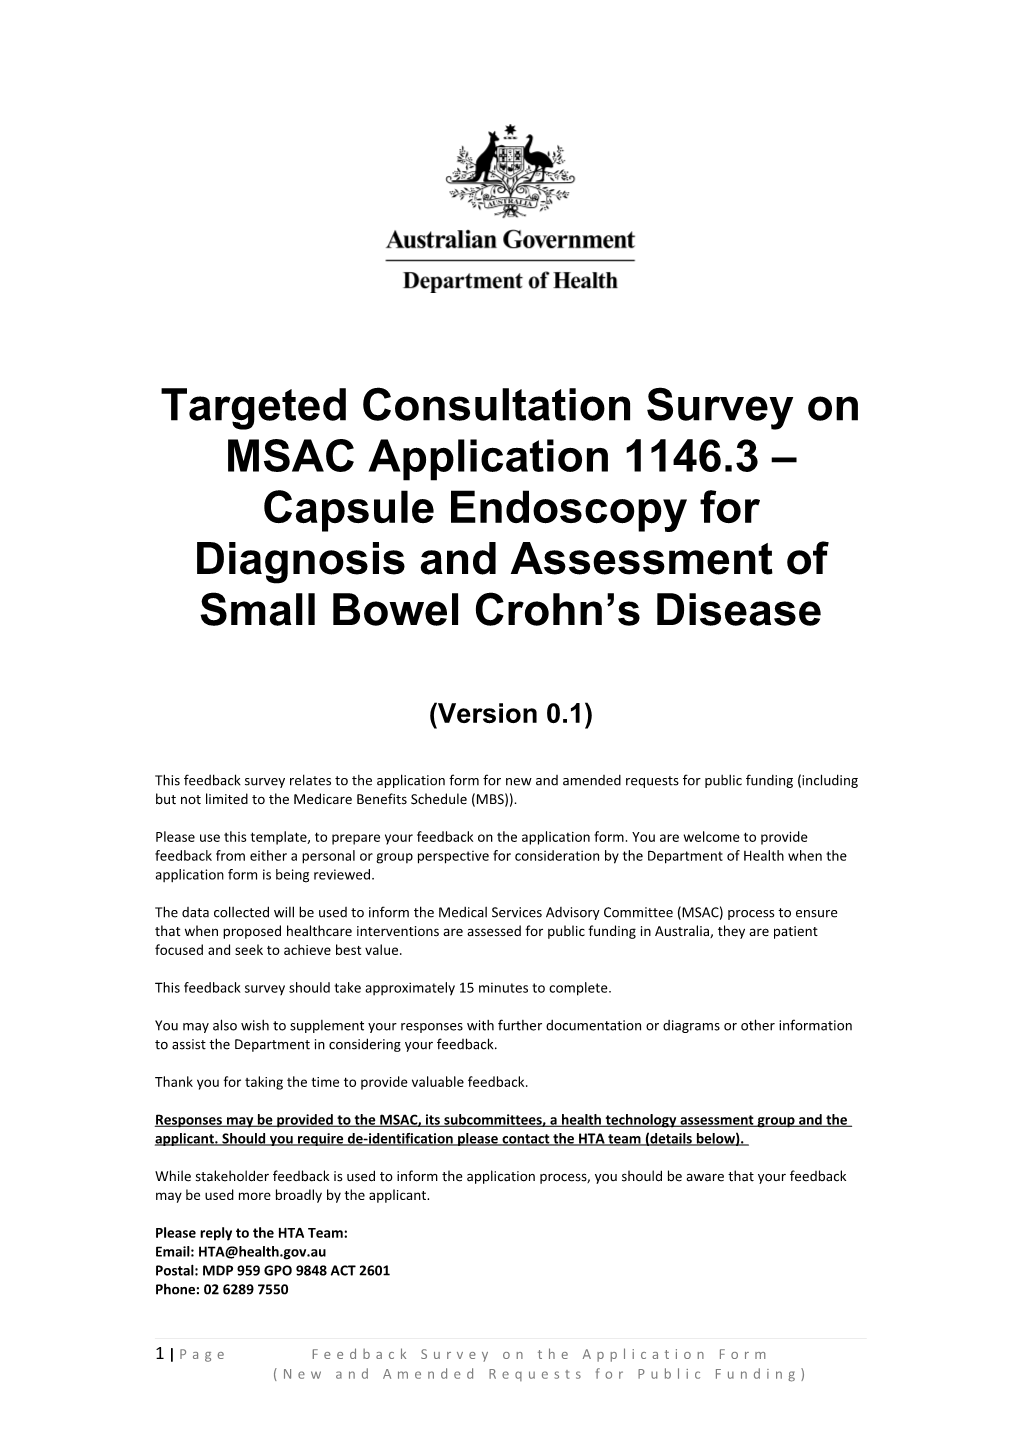 Targeted Consultation Survey on MSAC Application 1146.3 Capsule Endoscopy for Diagnosis